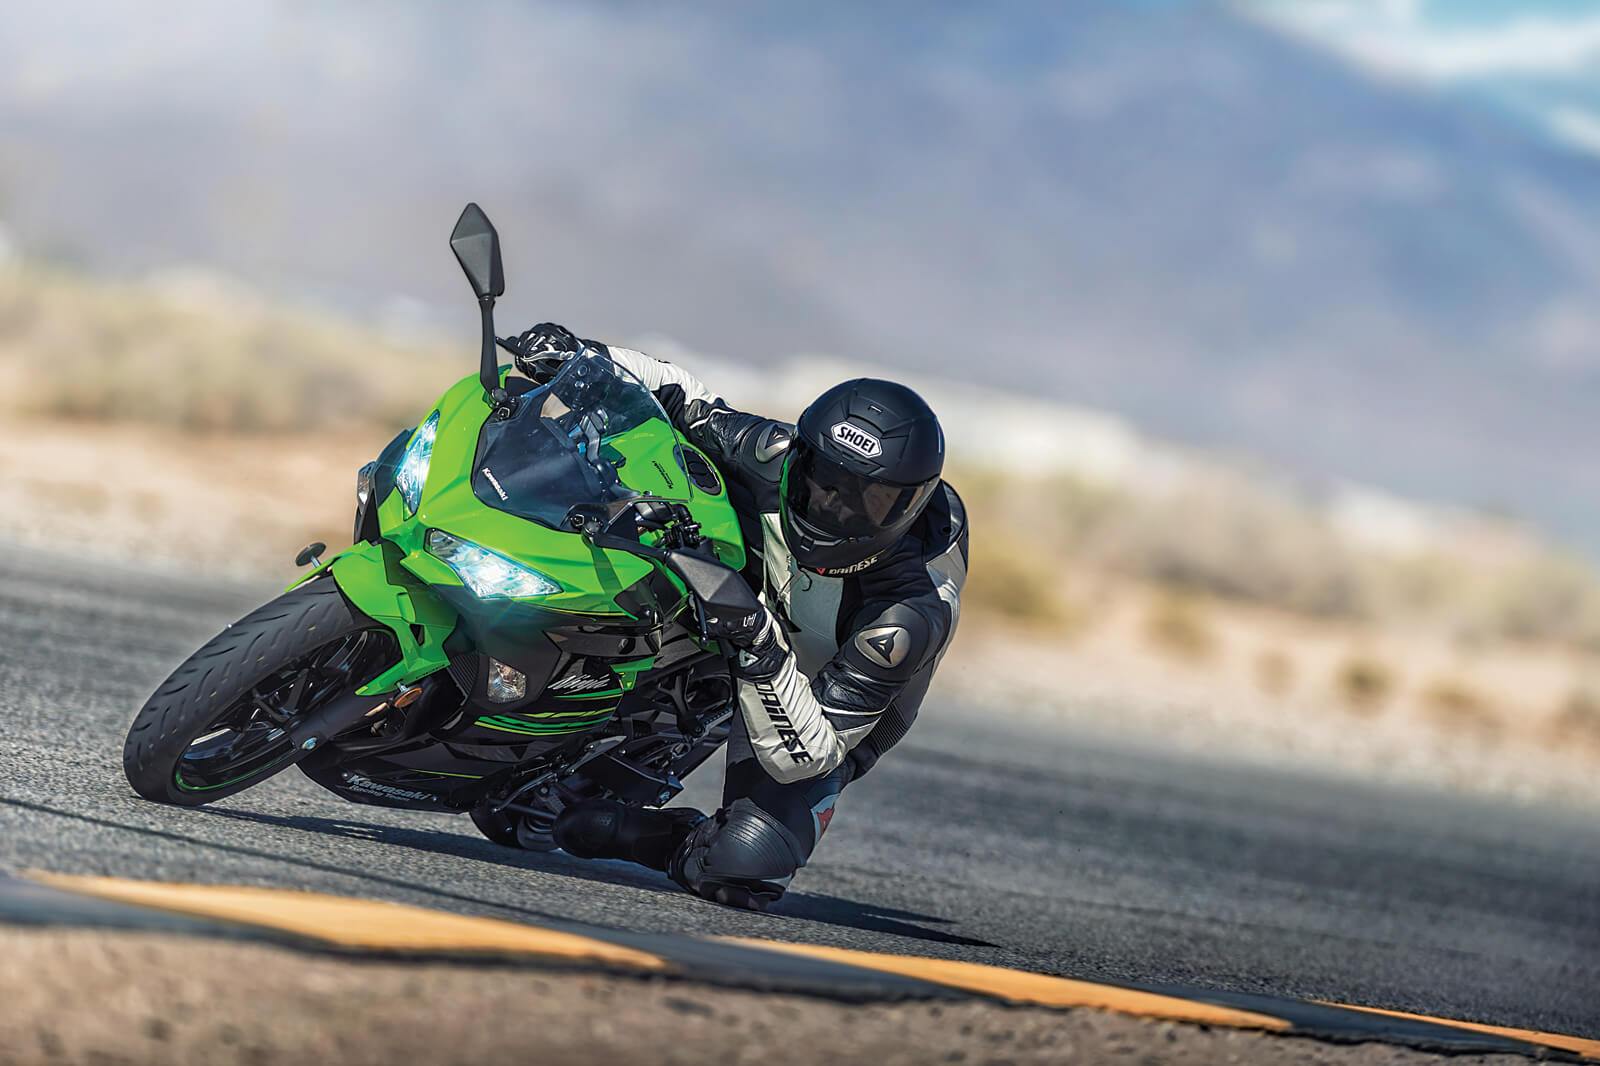 Kawasaki has unleashed 2021 Ninja 400 with a top speed 105 mph Adrenaline Culture of Motorcycle